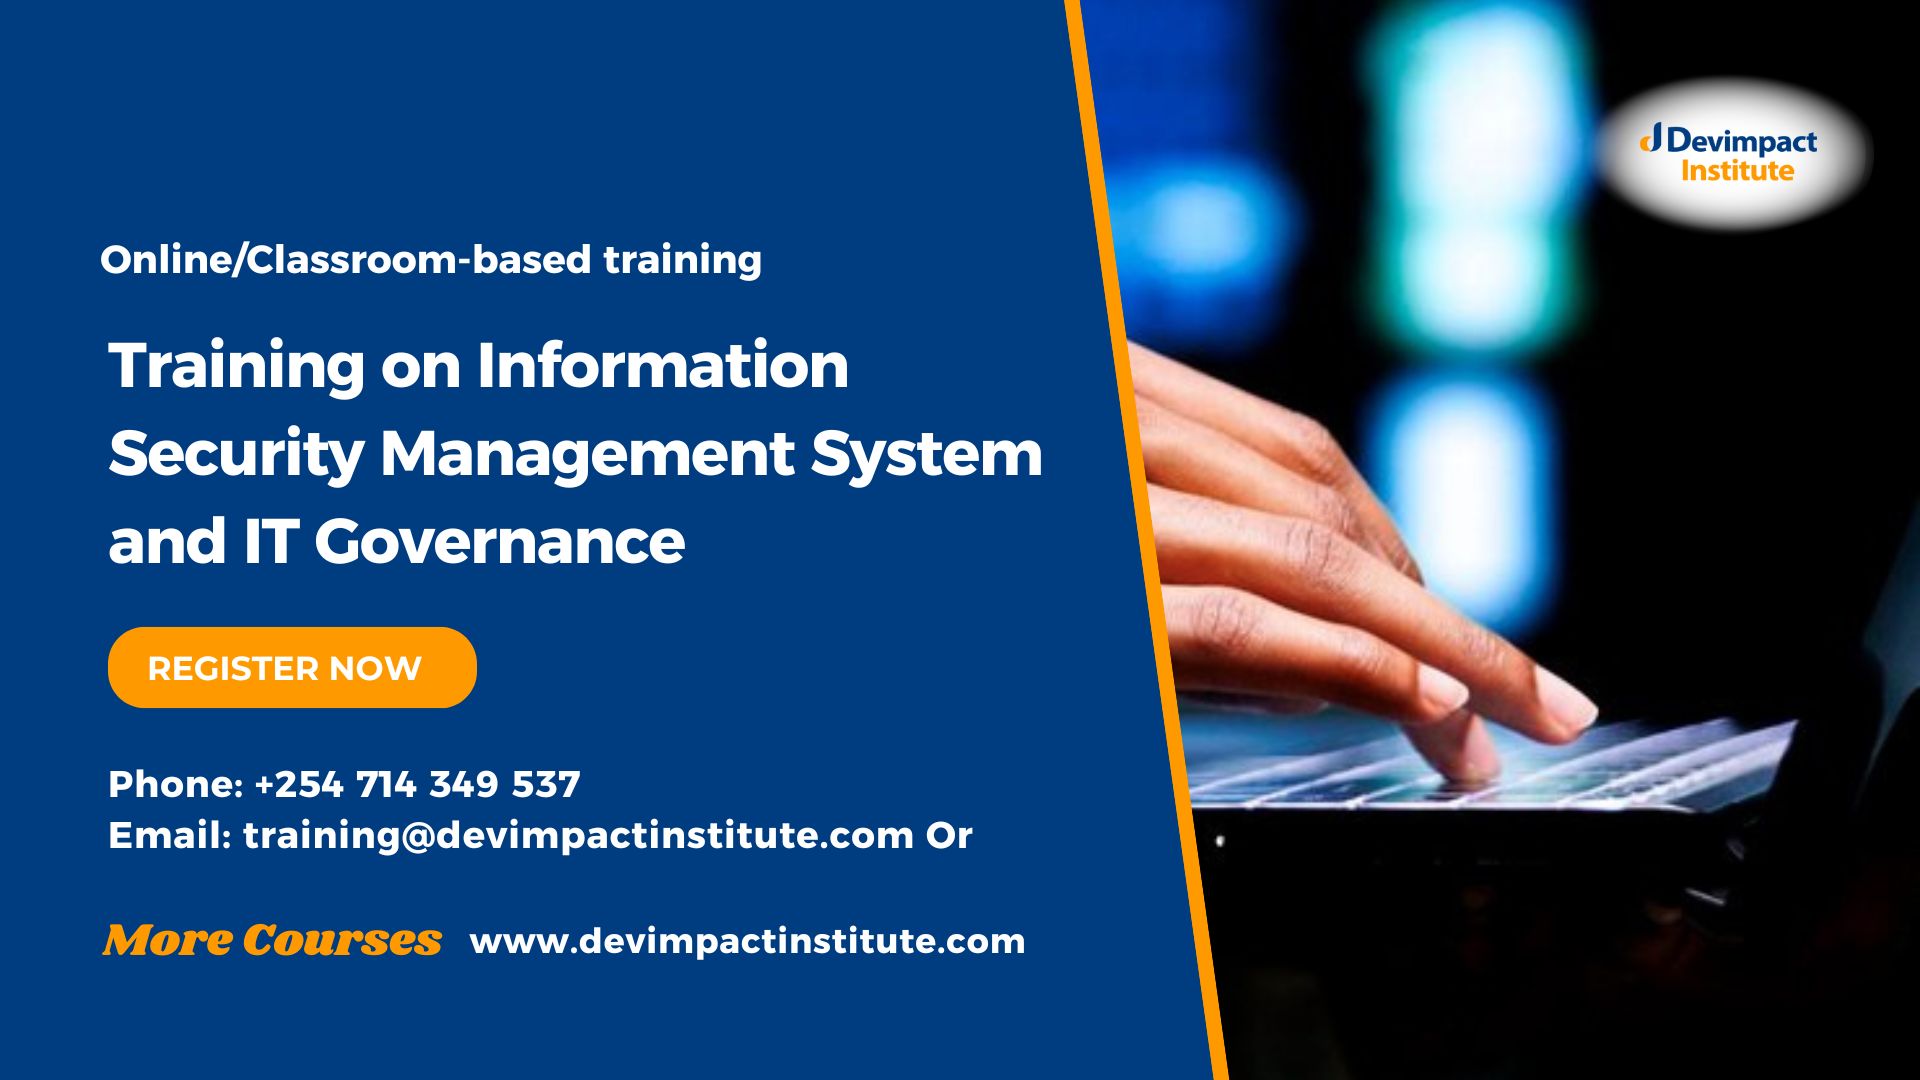 Training on Information Security Management System and IT Governance, Devimpact Institute, Nairobi, Kenya